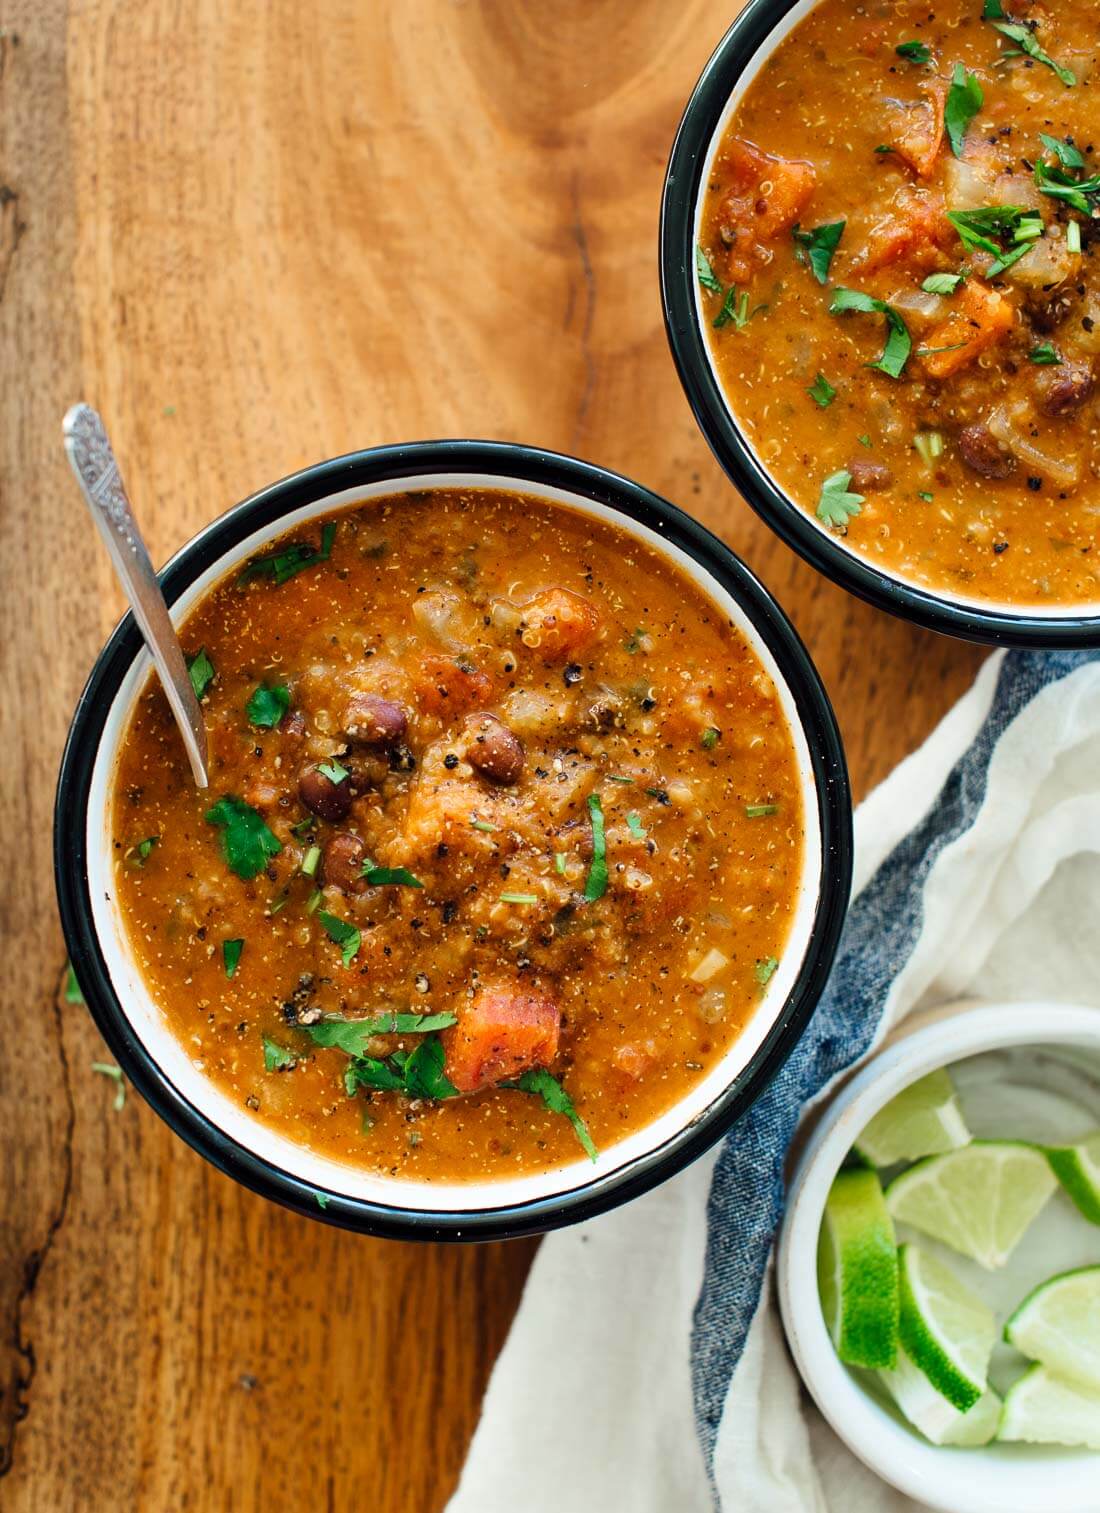 This hearty vegan quinoa soup will fill you up but won't weigh you down!